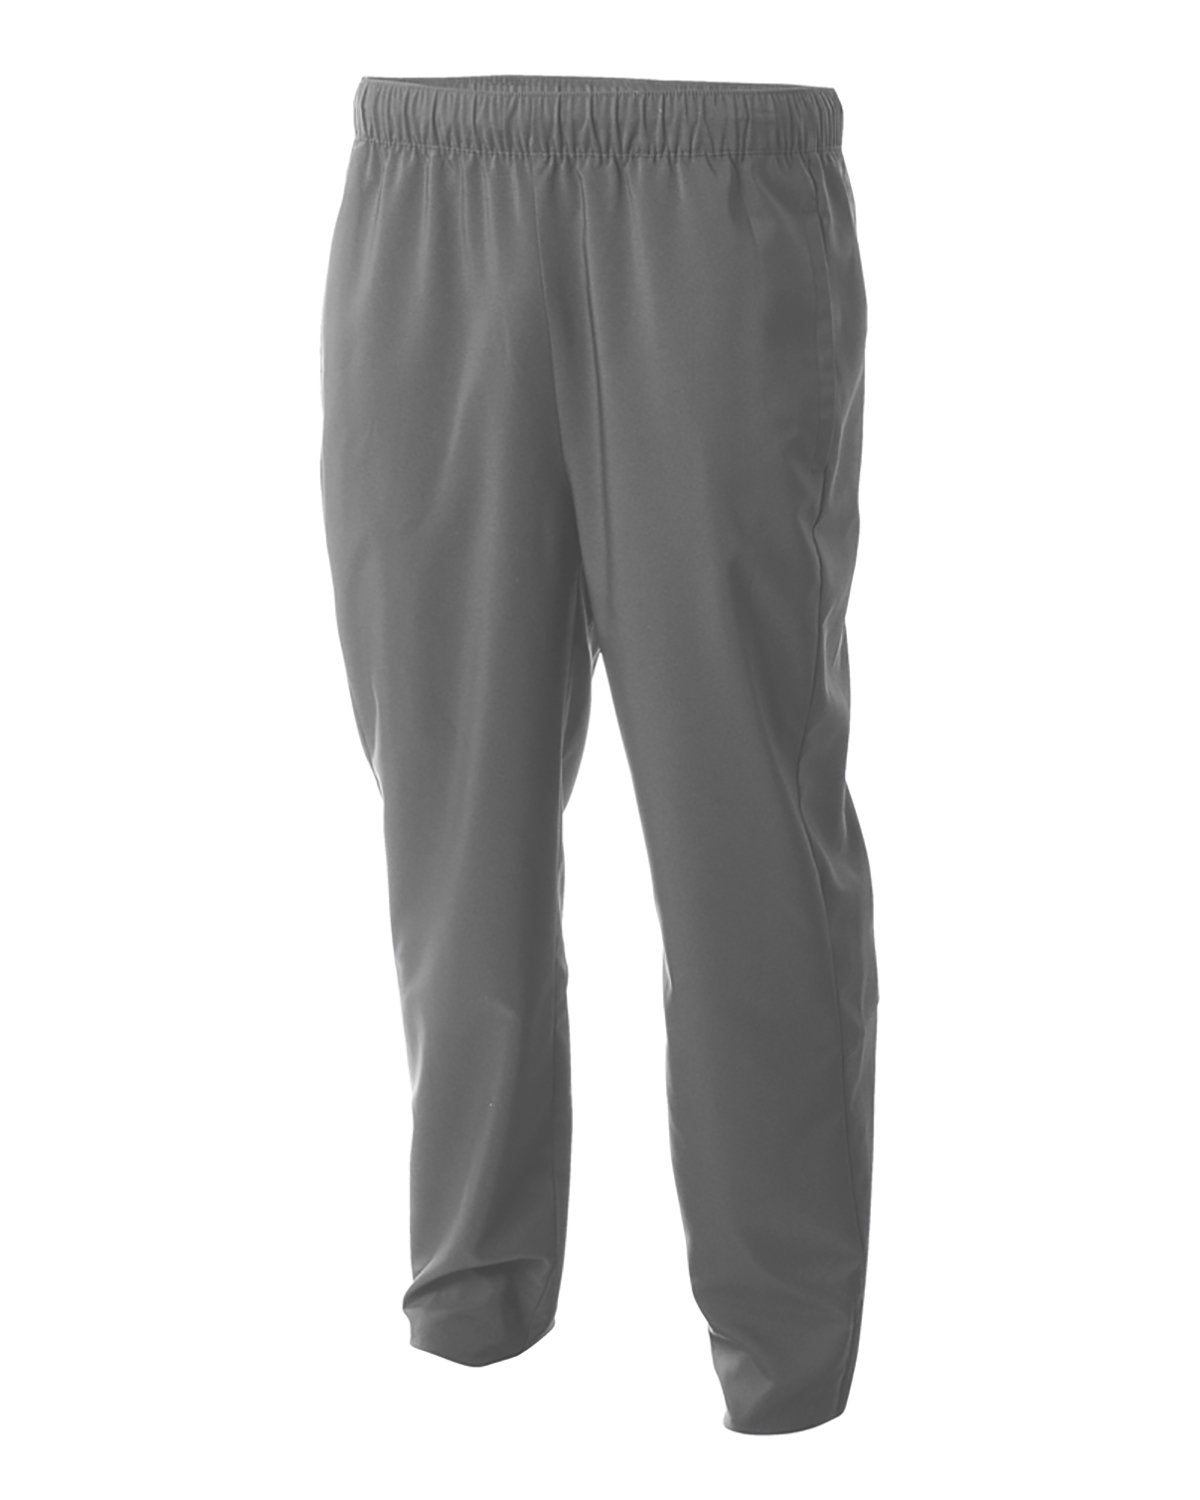 A4 Men's Element Woven Training Pant: Performance and Style